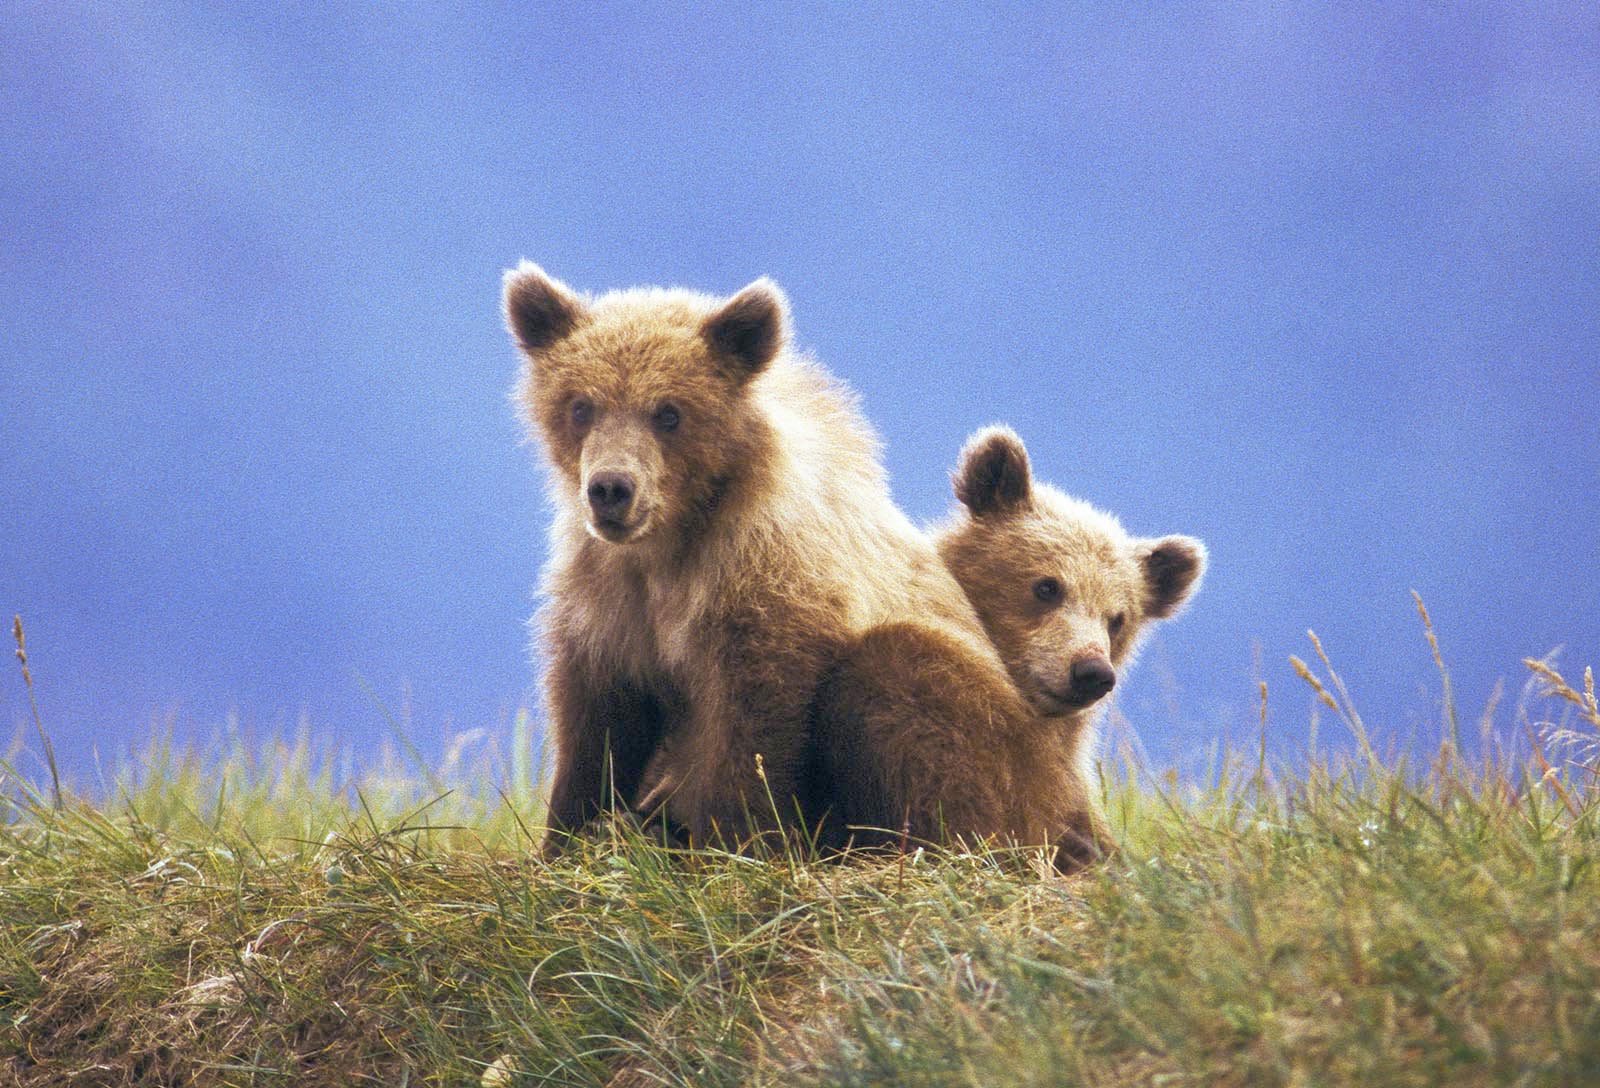 Mama Bears Use Humans To Keep Their Cubs Safe